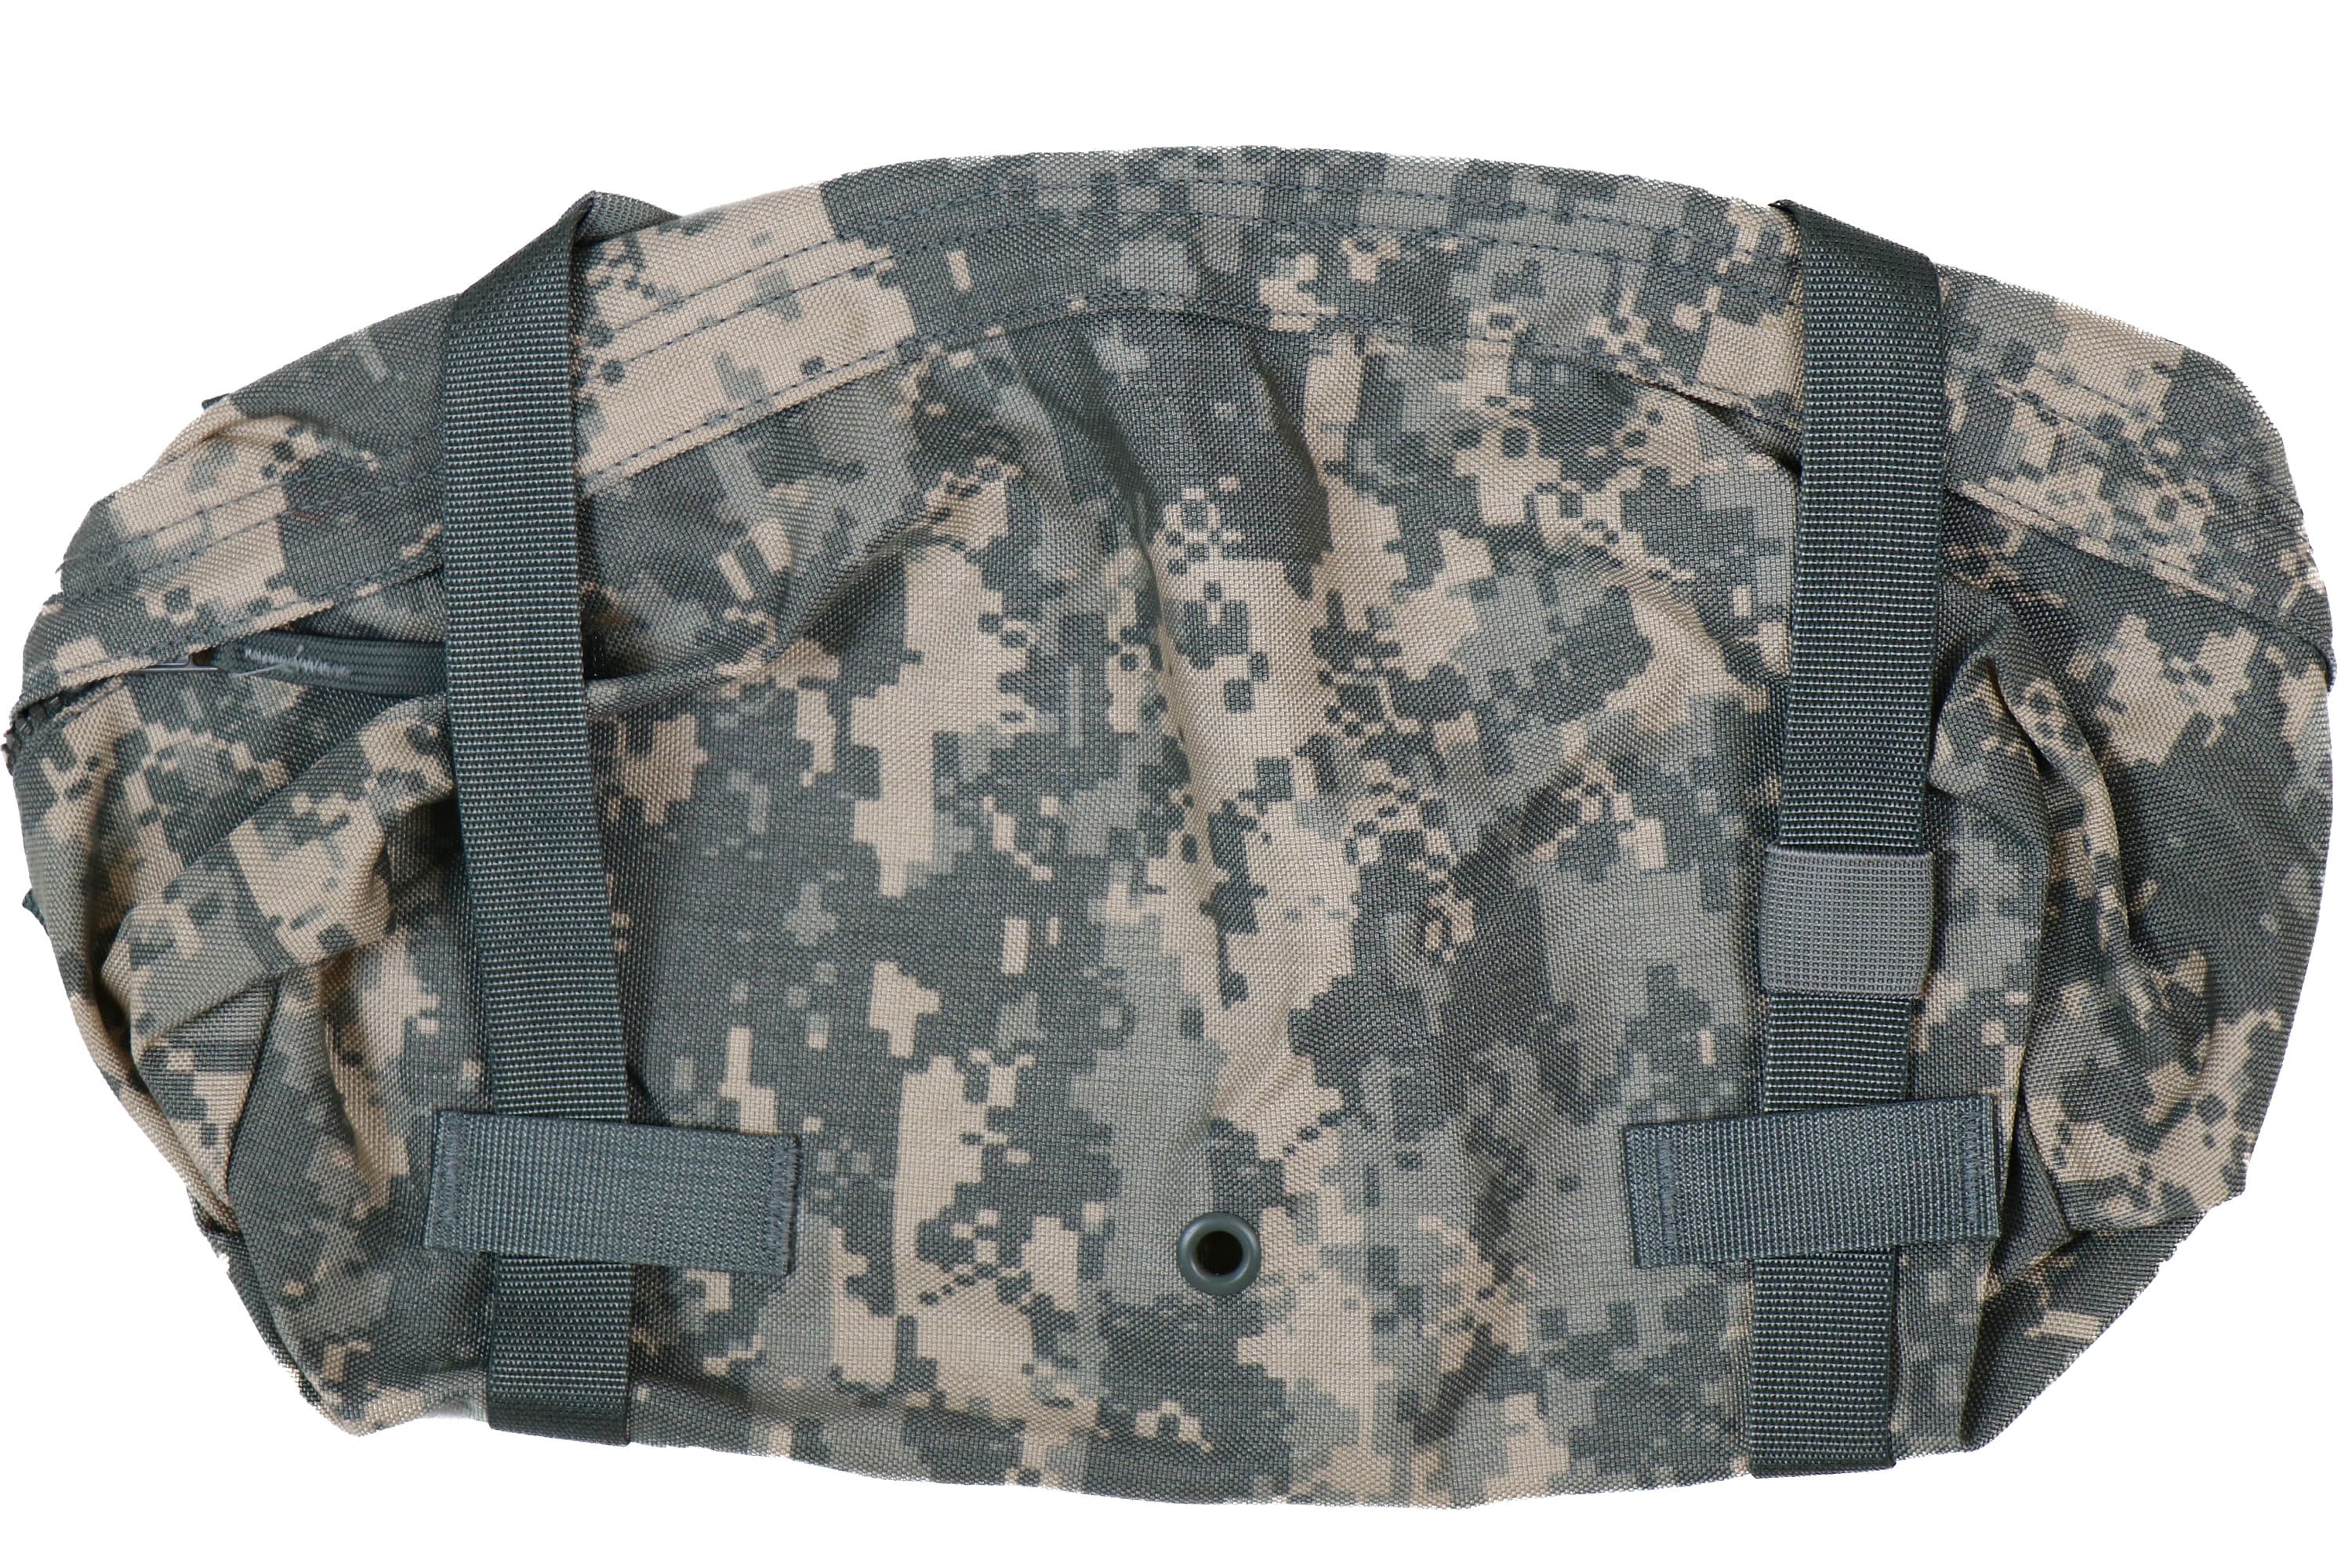 Buy Us Army Butt Pack Online In India -  India